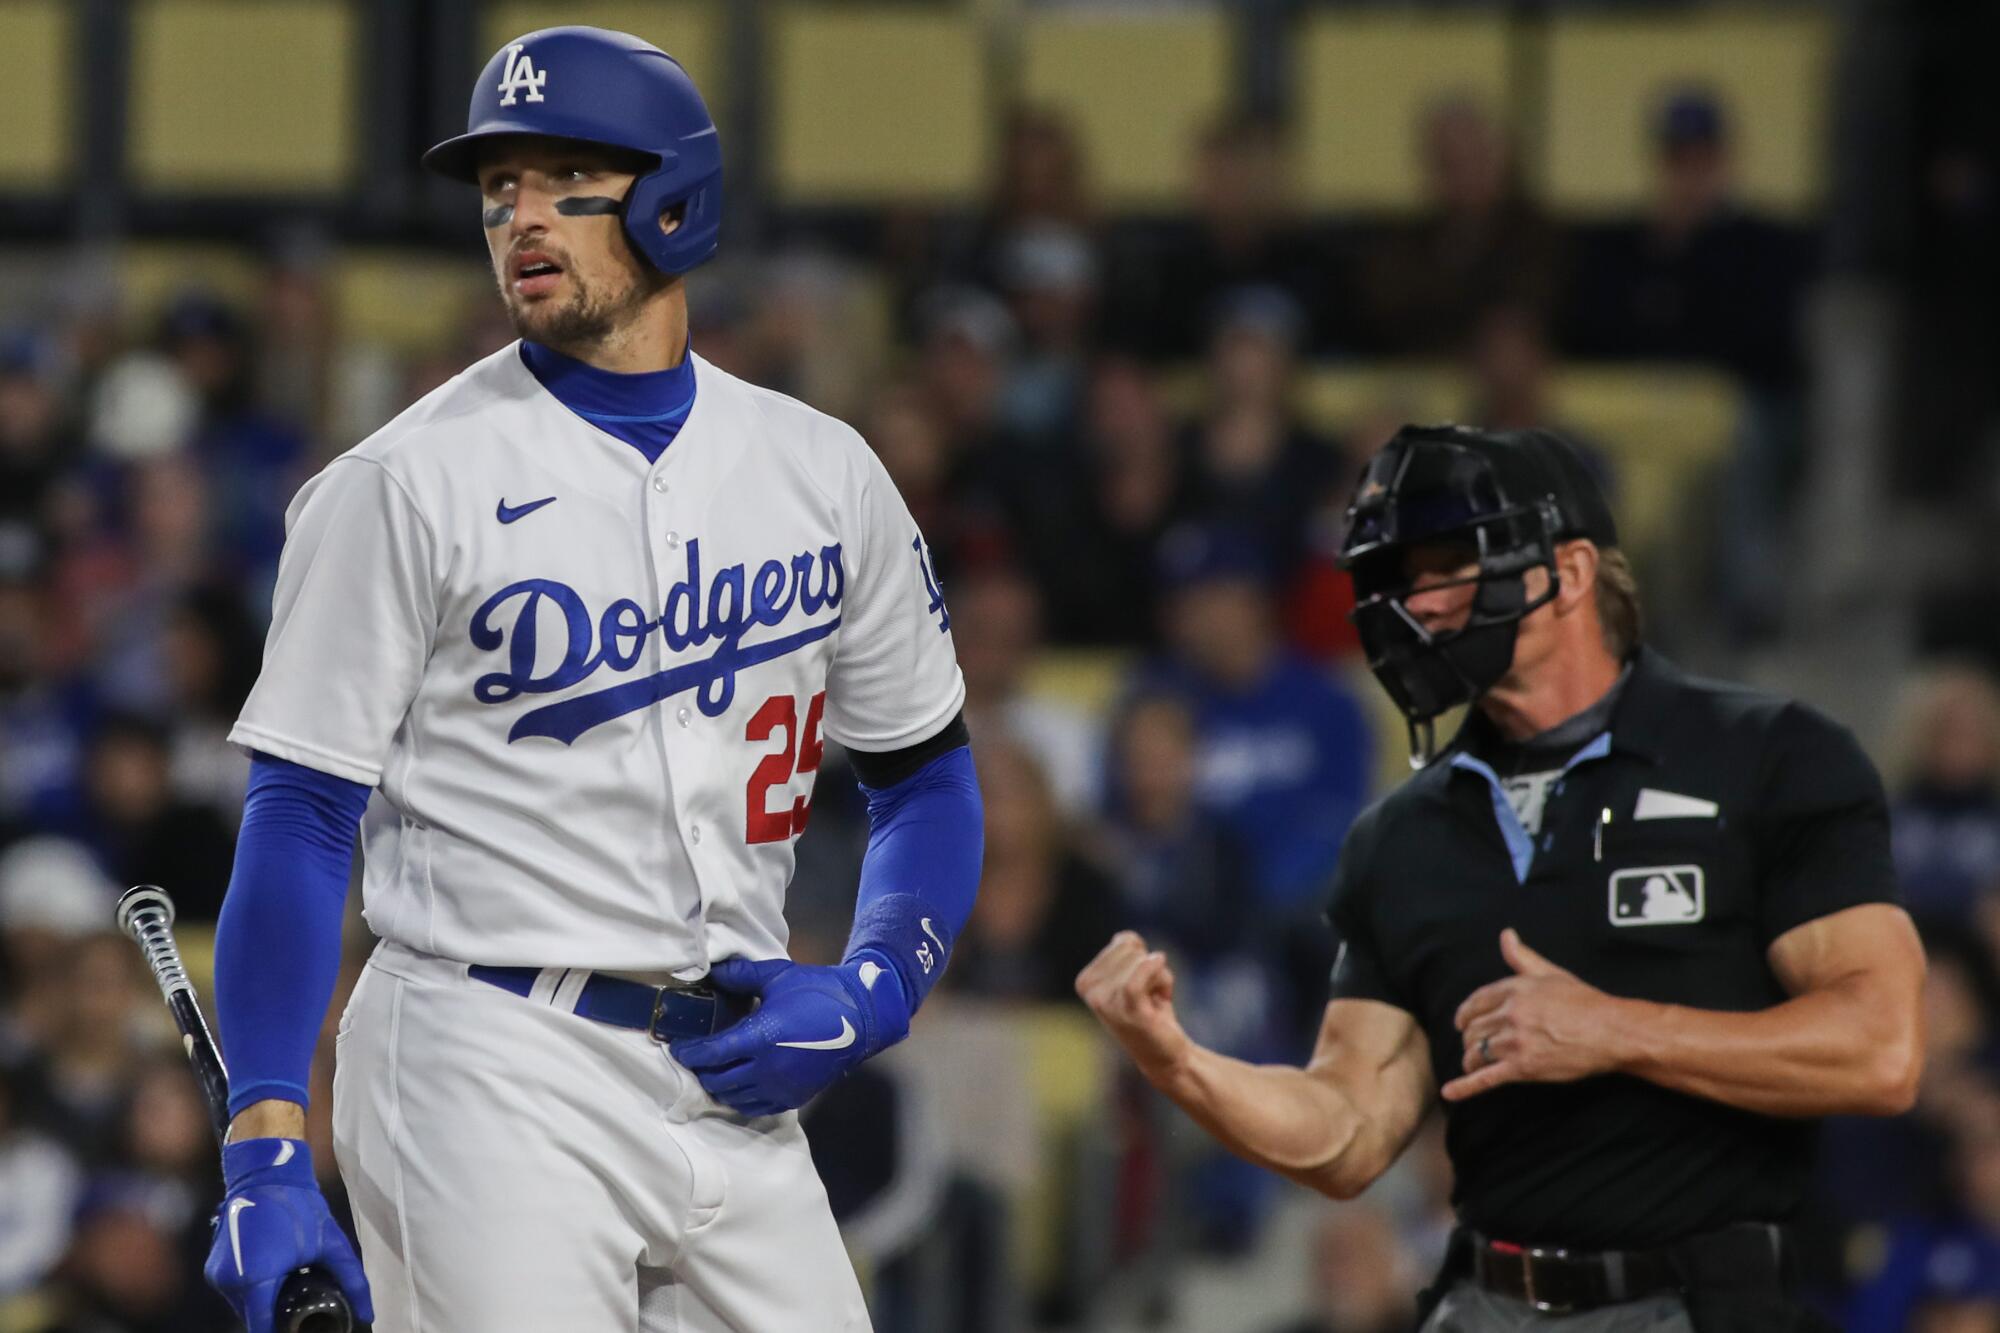 Dodgers' Trayce Thompson reacts after striking out against the Chicago Cubs on April 14 at Dodger Stadium.